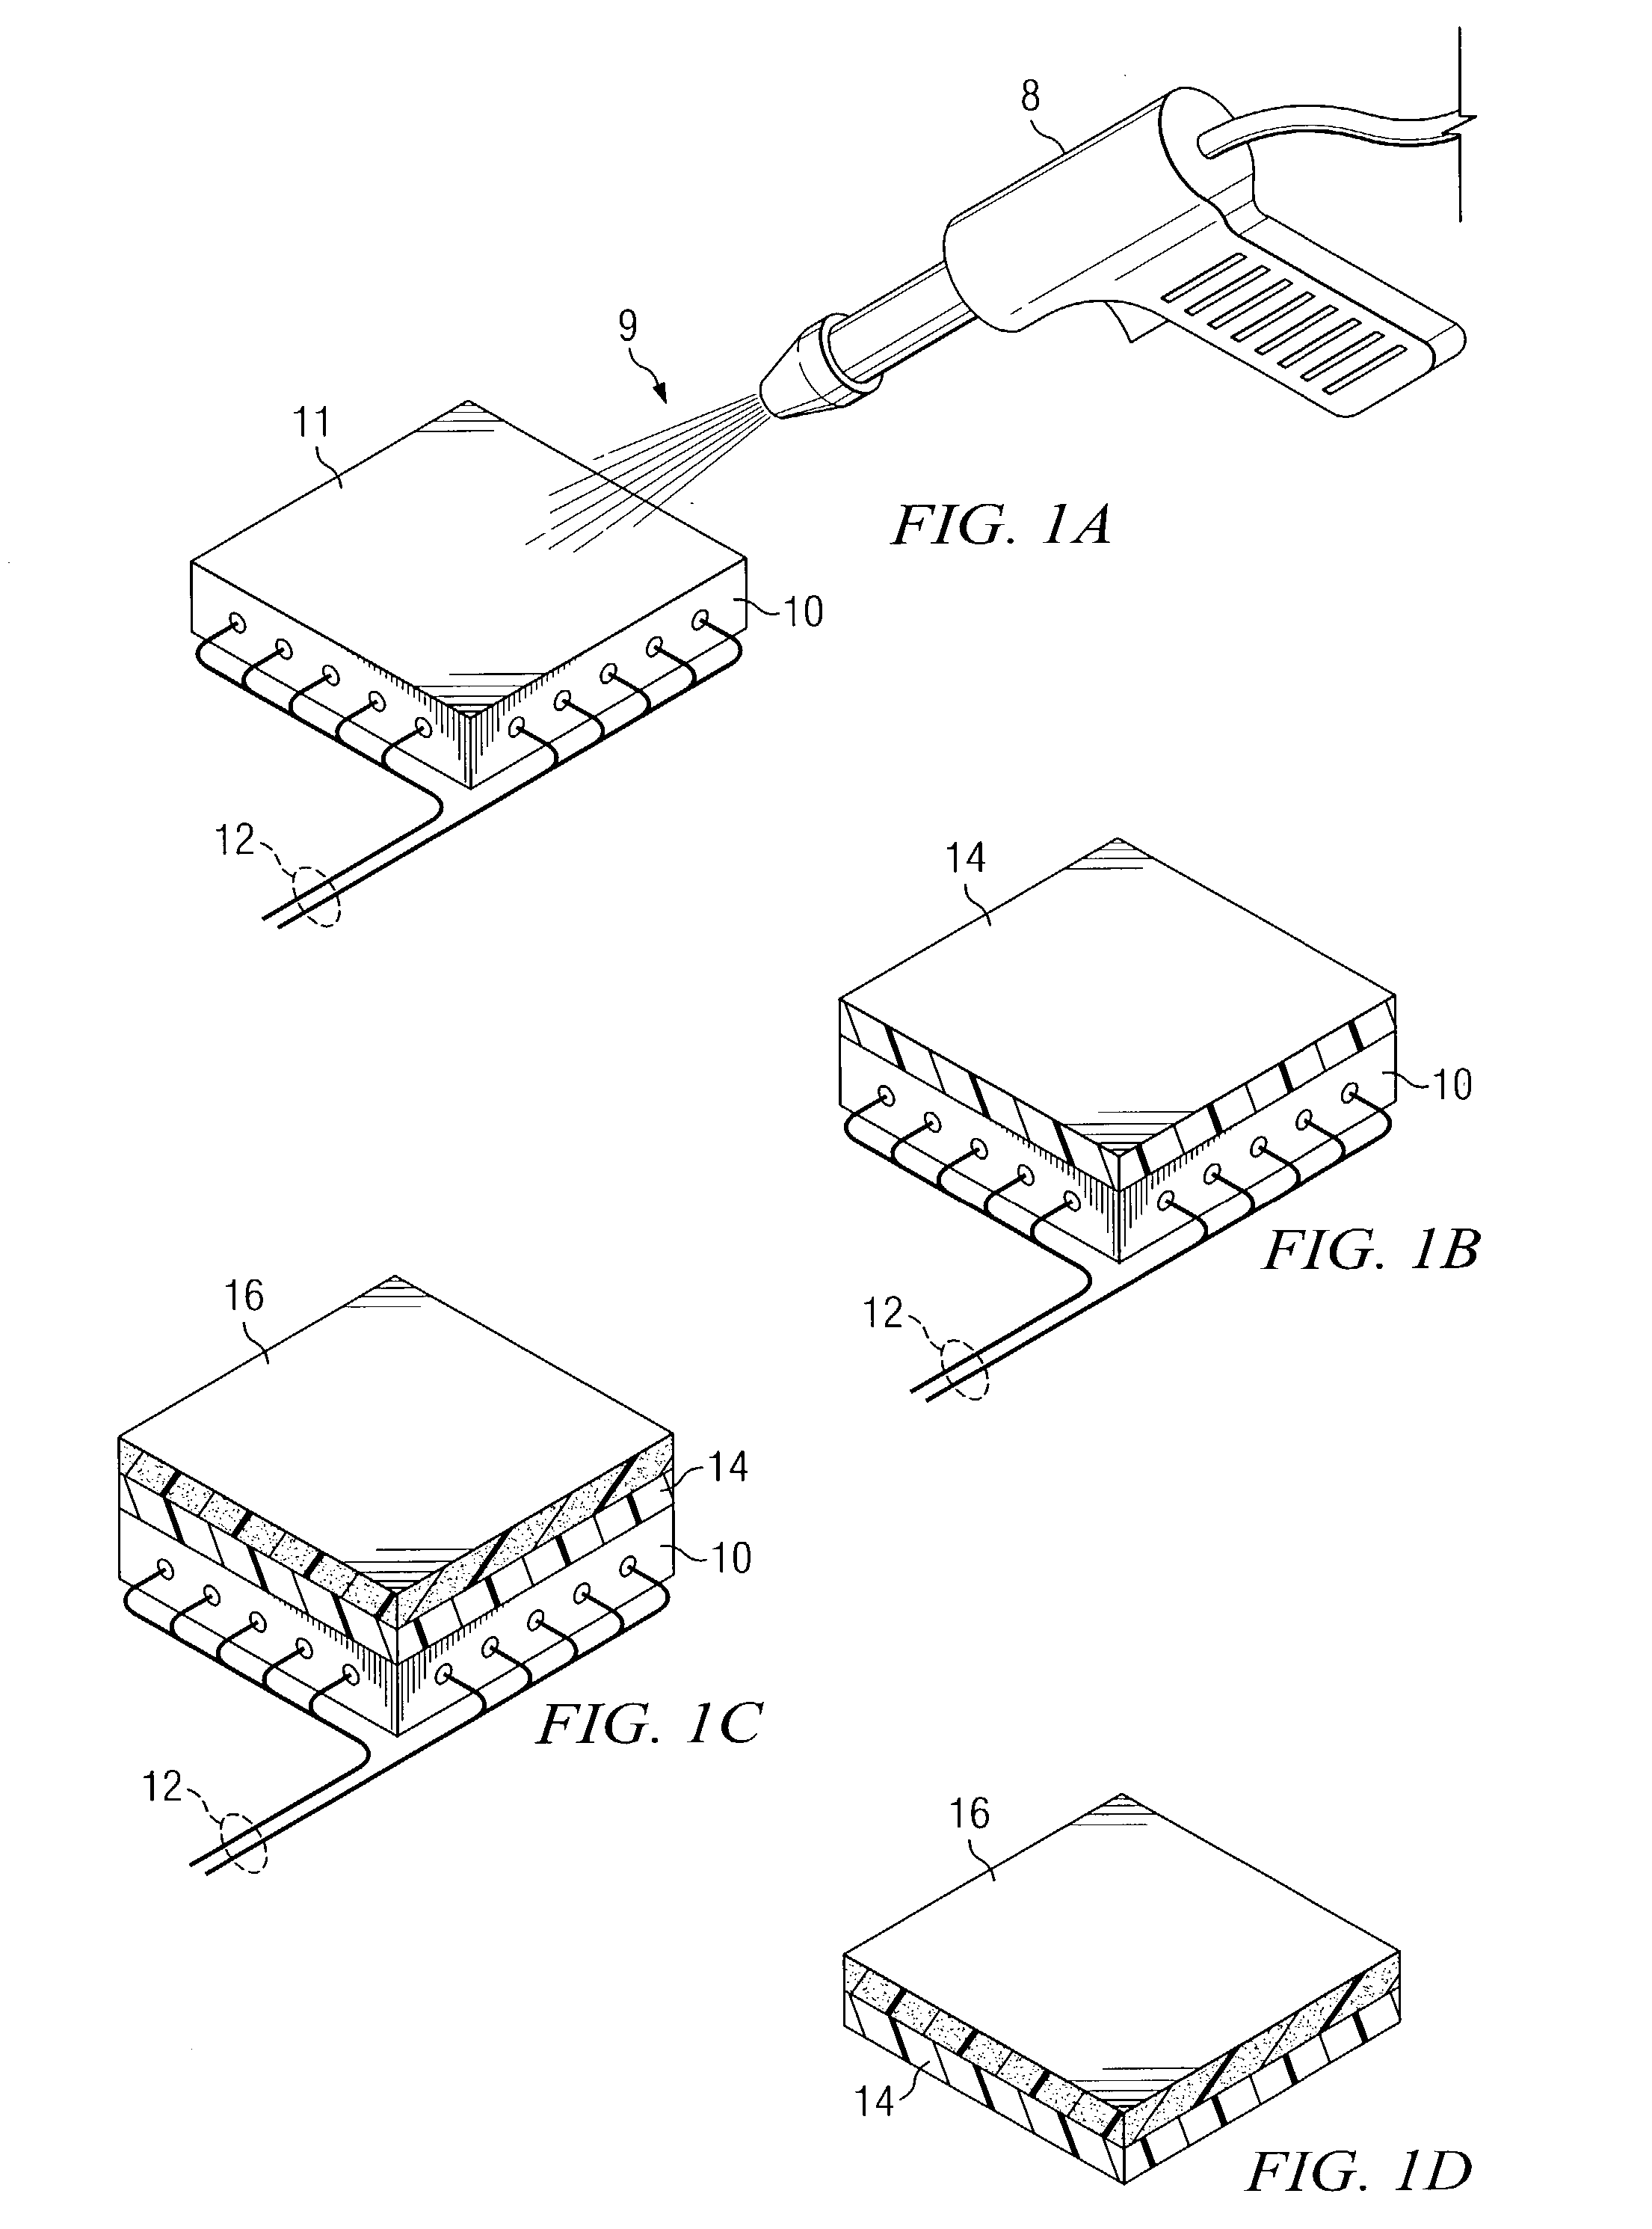 Thermoplastic coating for composite structures